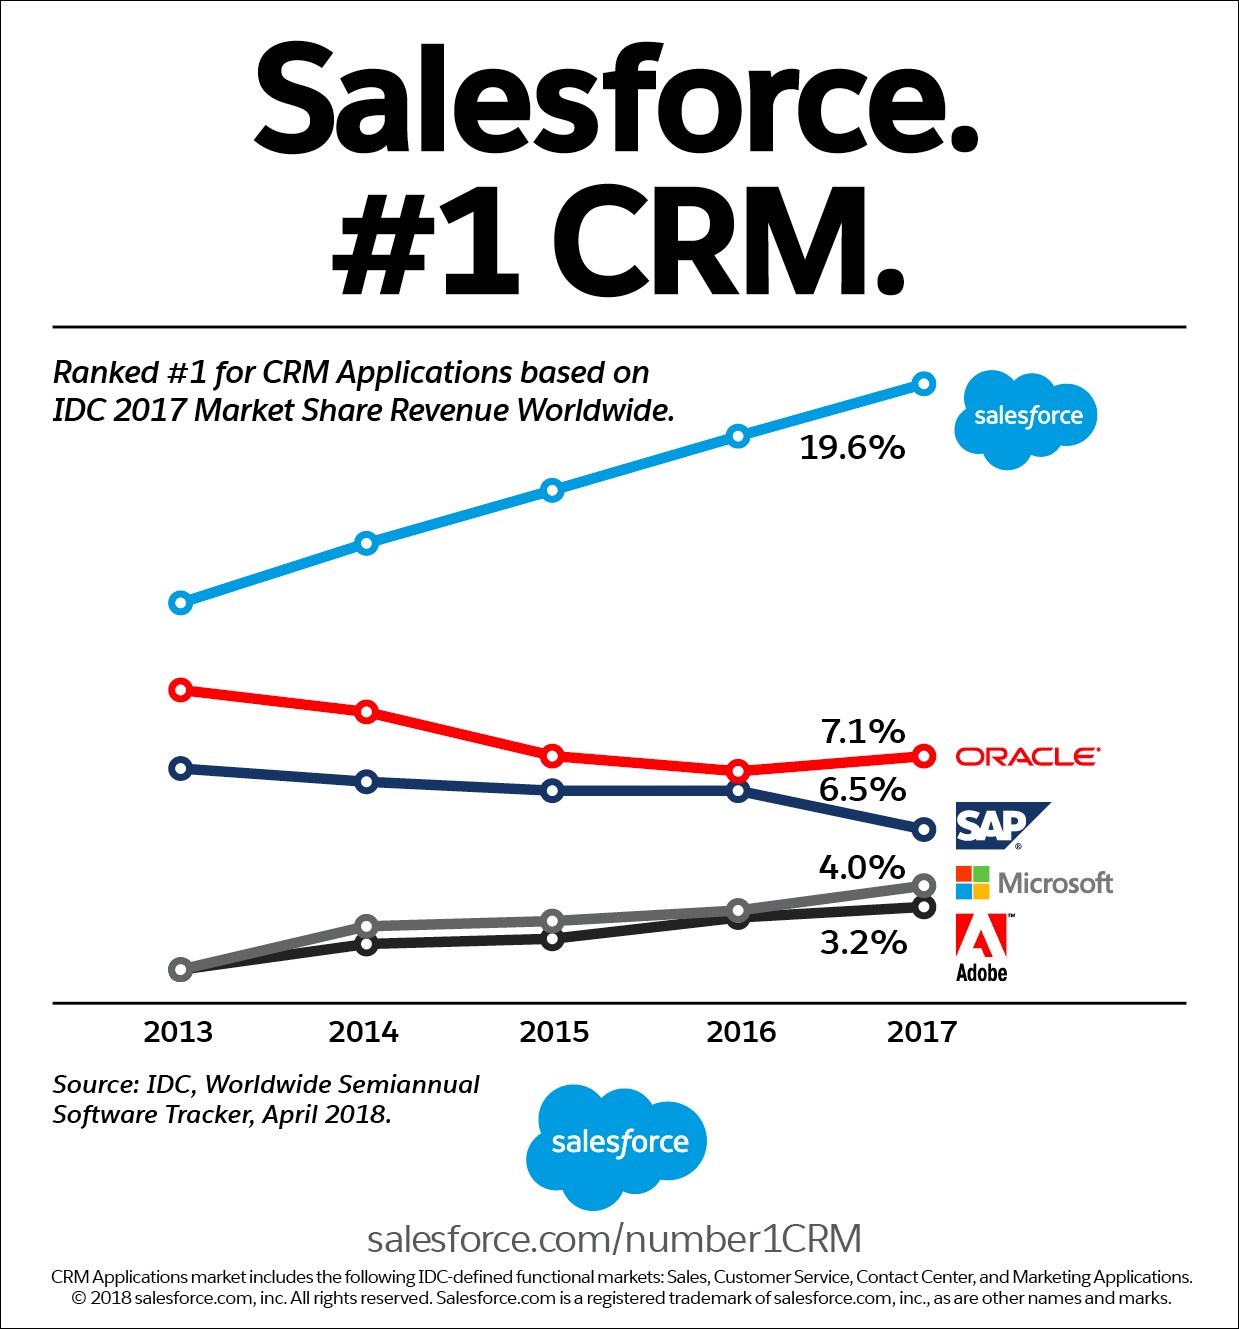 Why is Salesforce No 1 CRM?